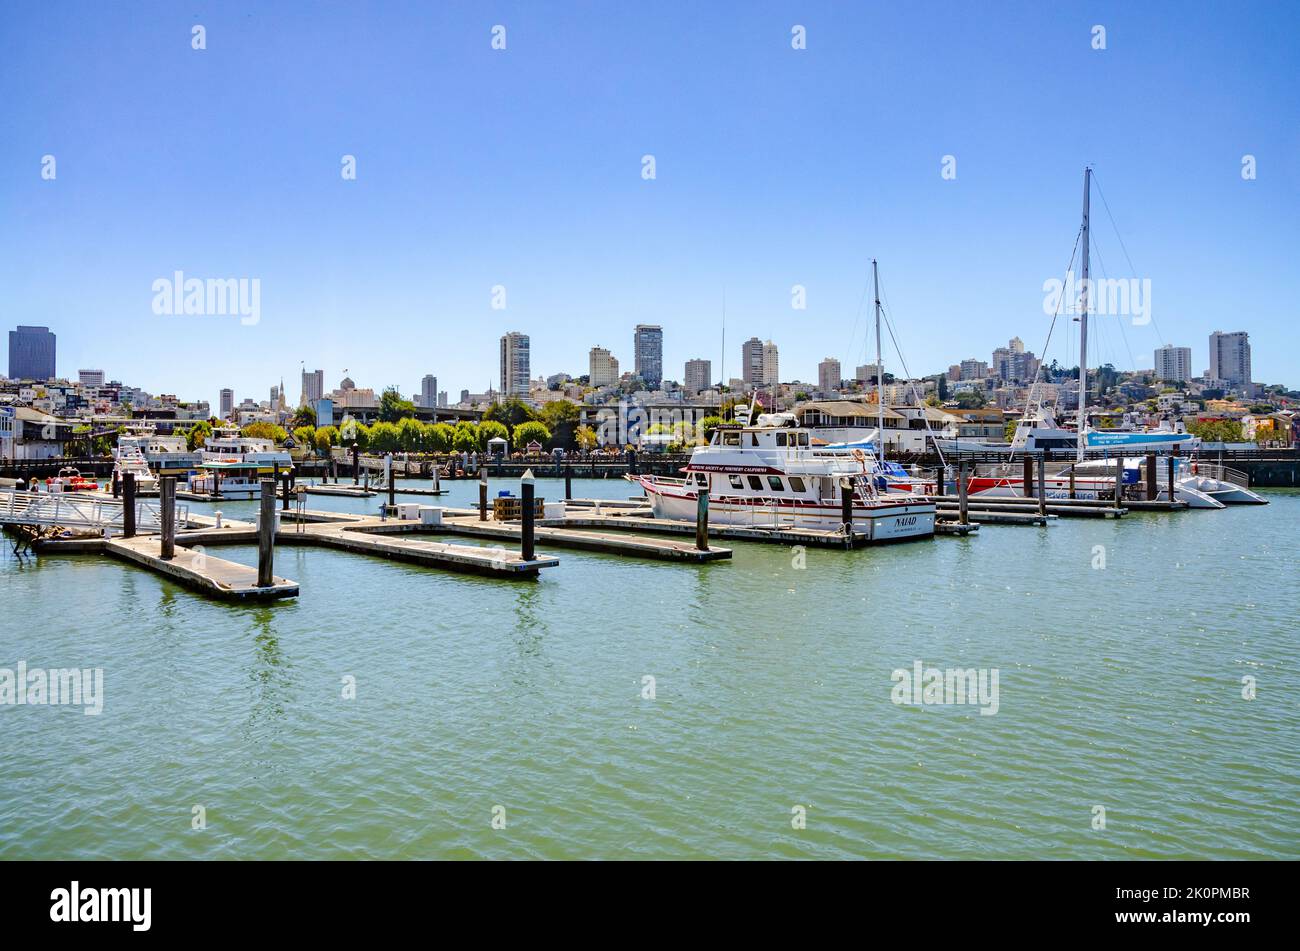 Boats moored at pontoons in the marina at Pier 39 in San Francisco, California with the San Francisco cityscape beyond. Stock Photo